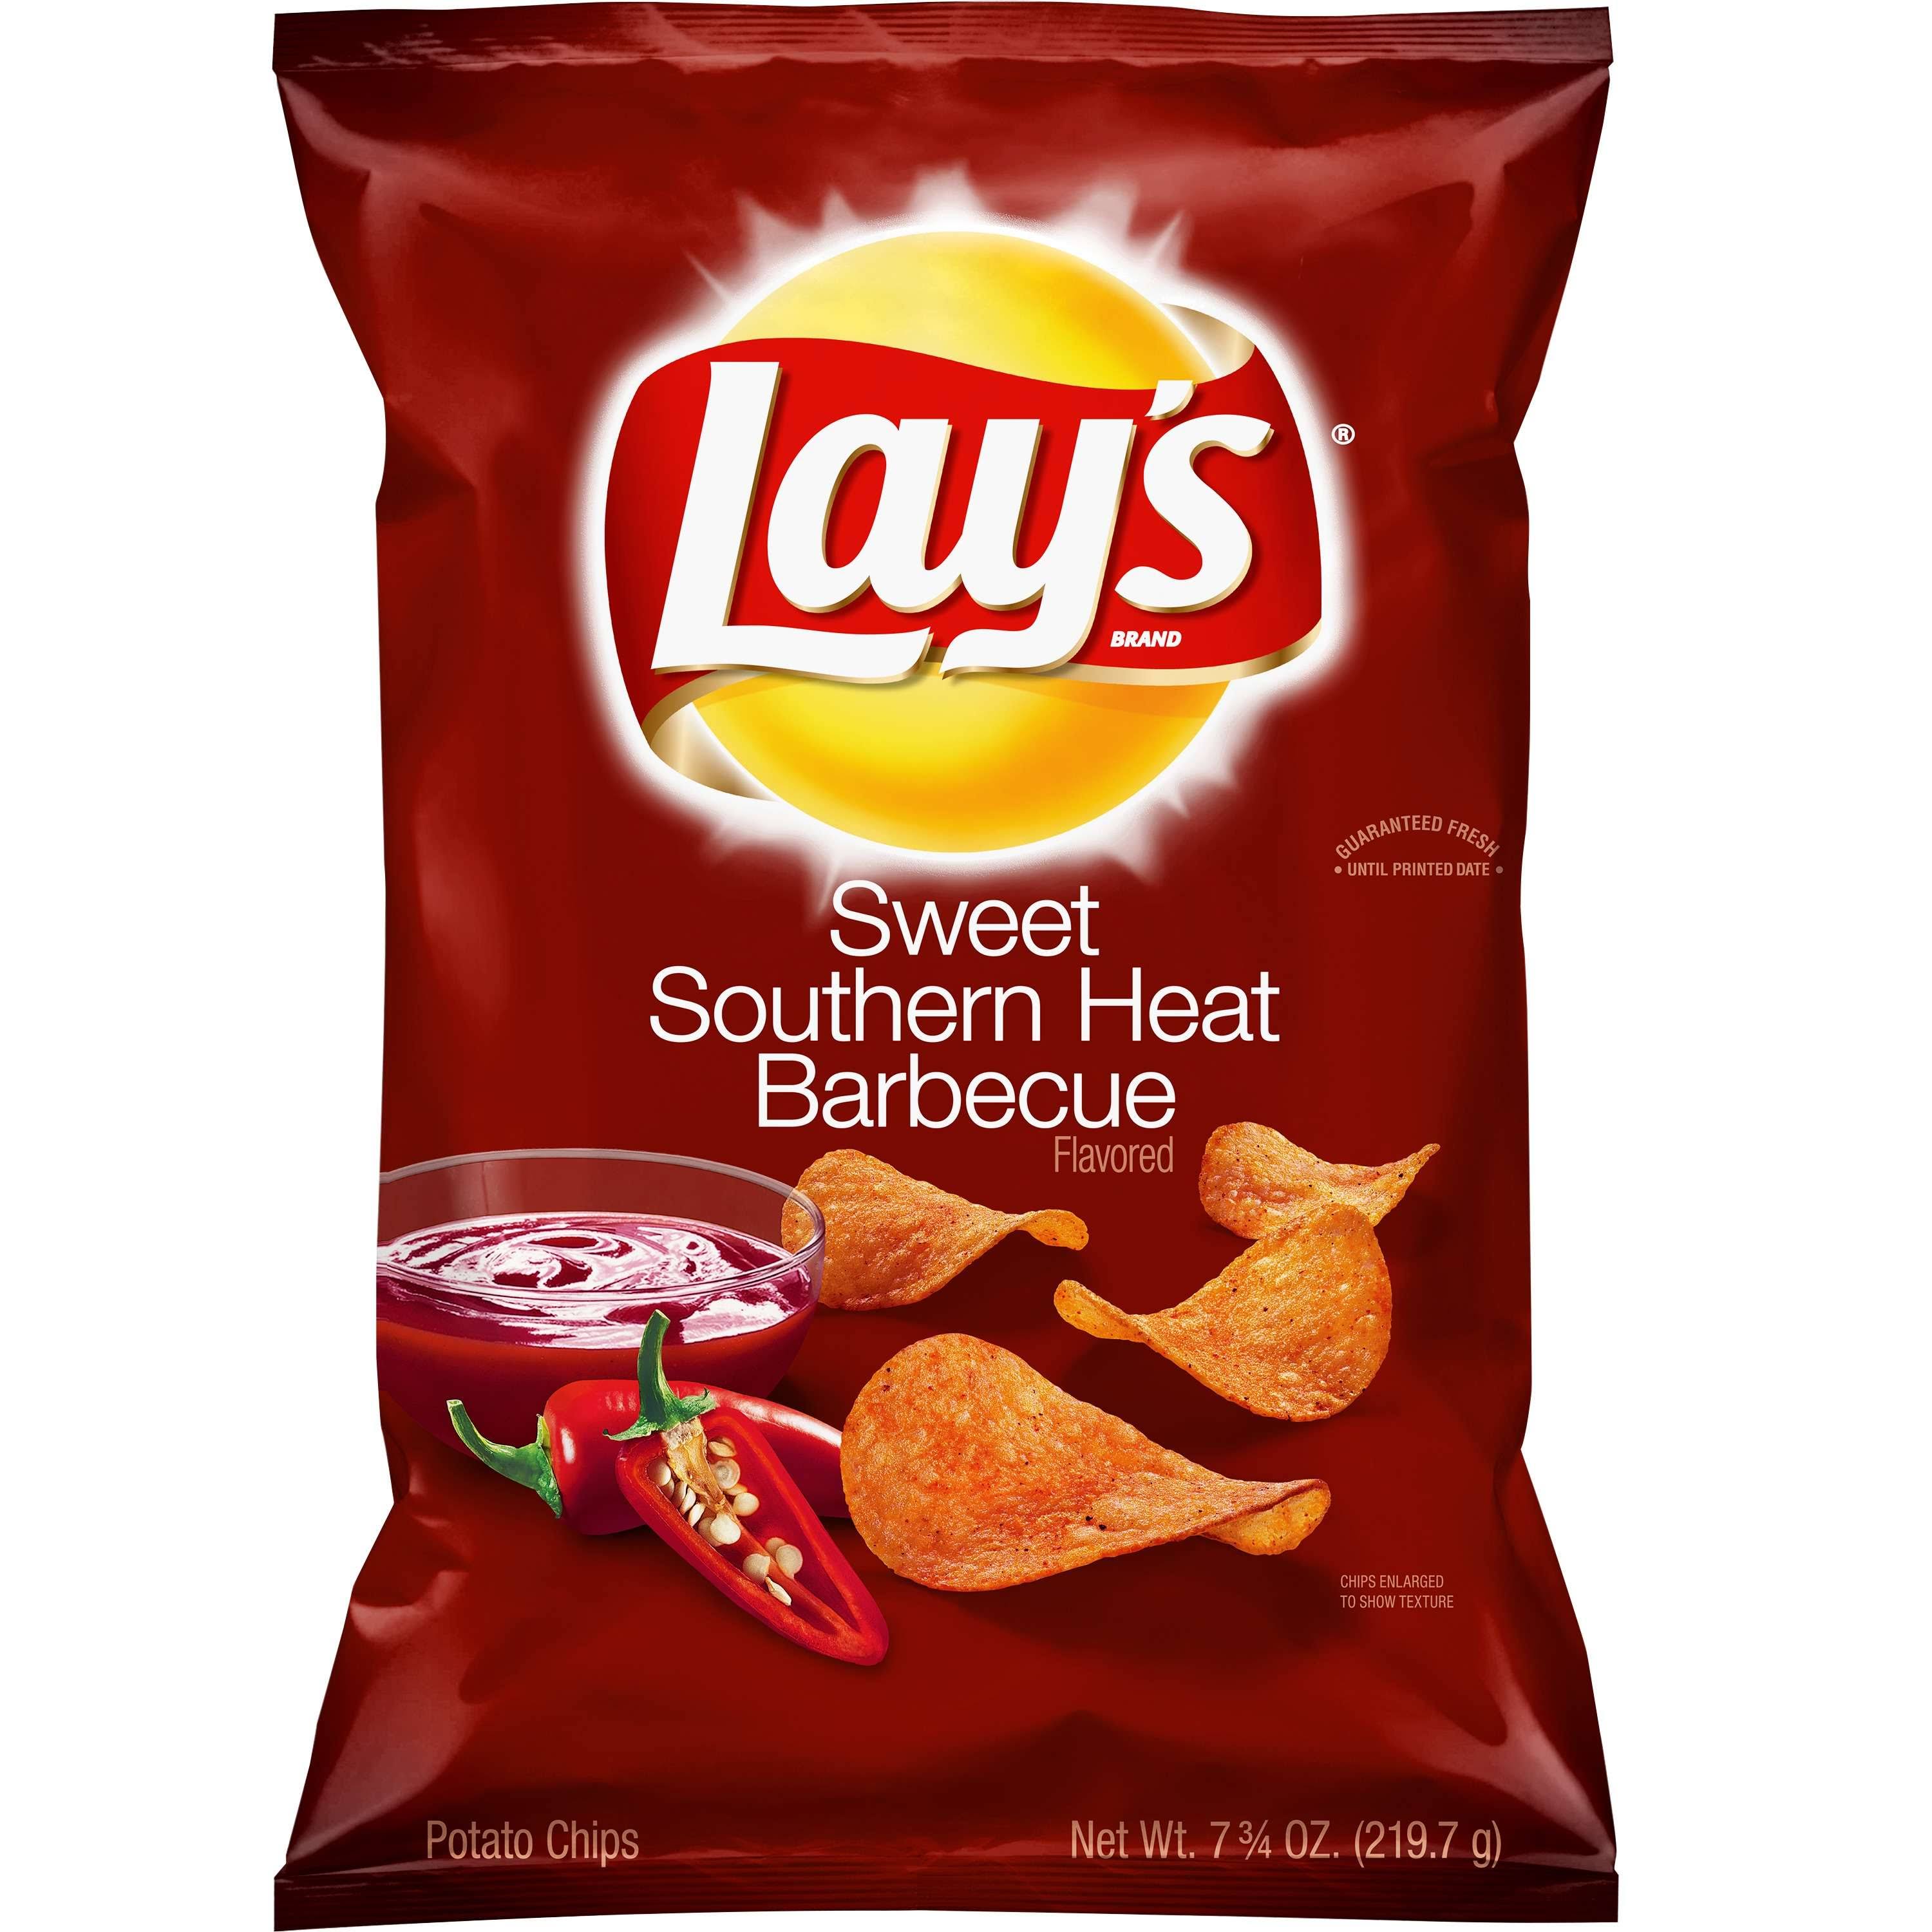 Lay's Potato Chips - Sweet Southern Heat Barbecue, 7.75oz